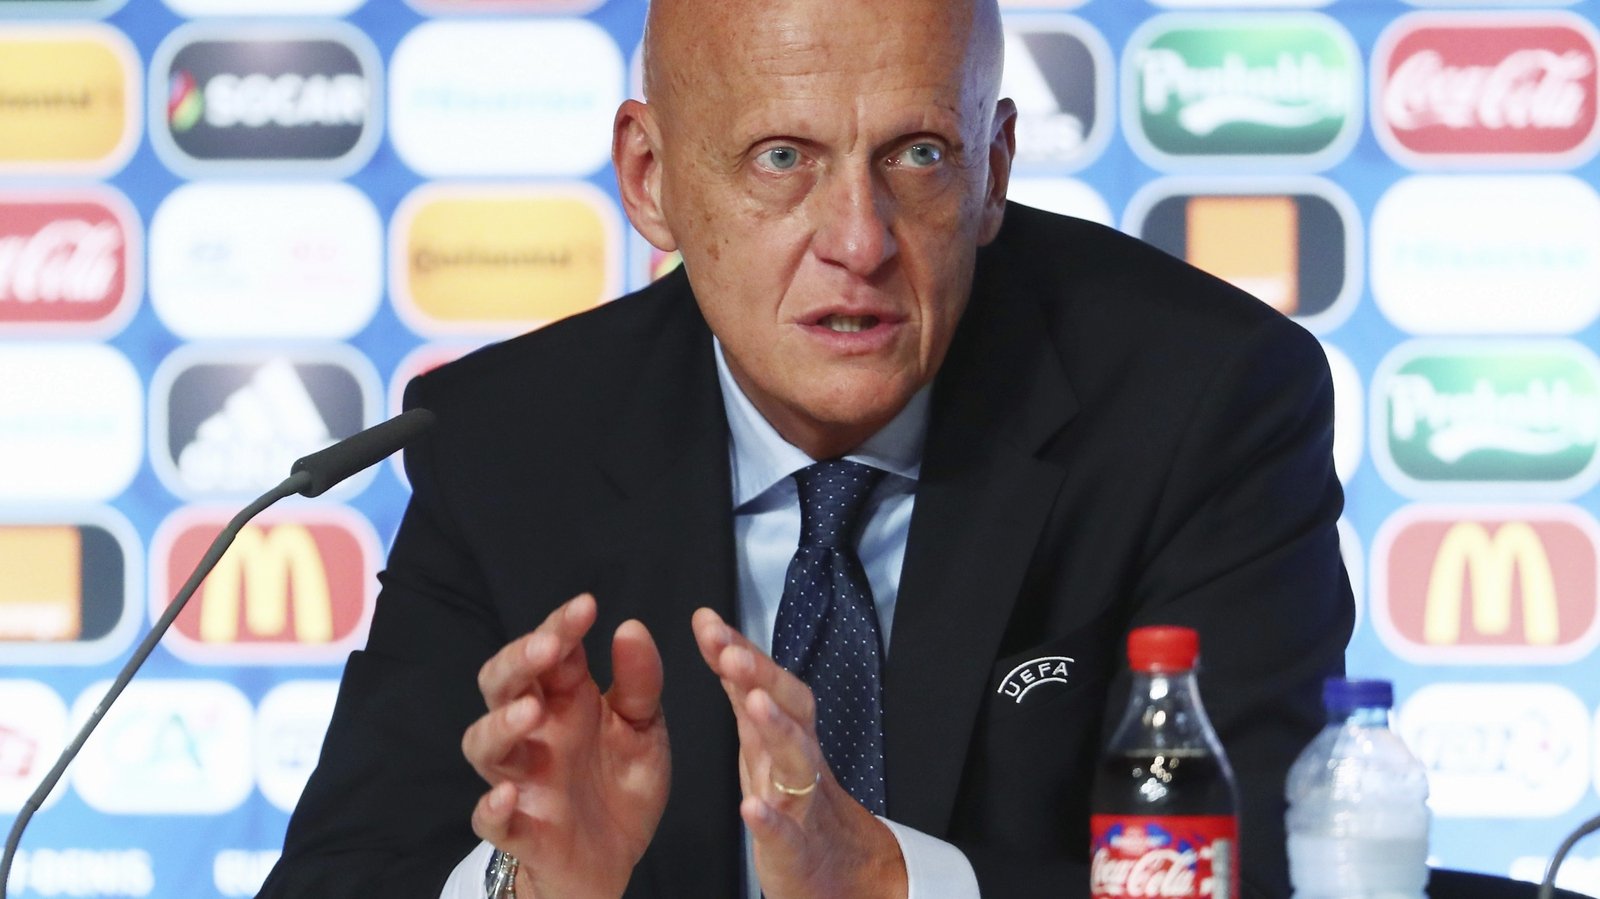 Collina says new measures are helping referees